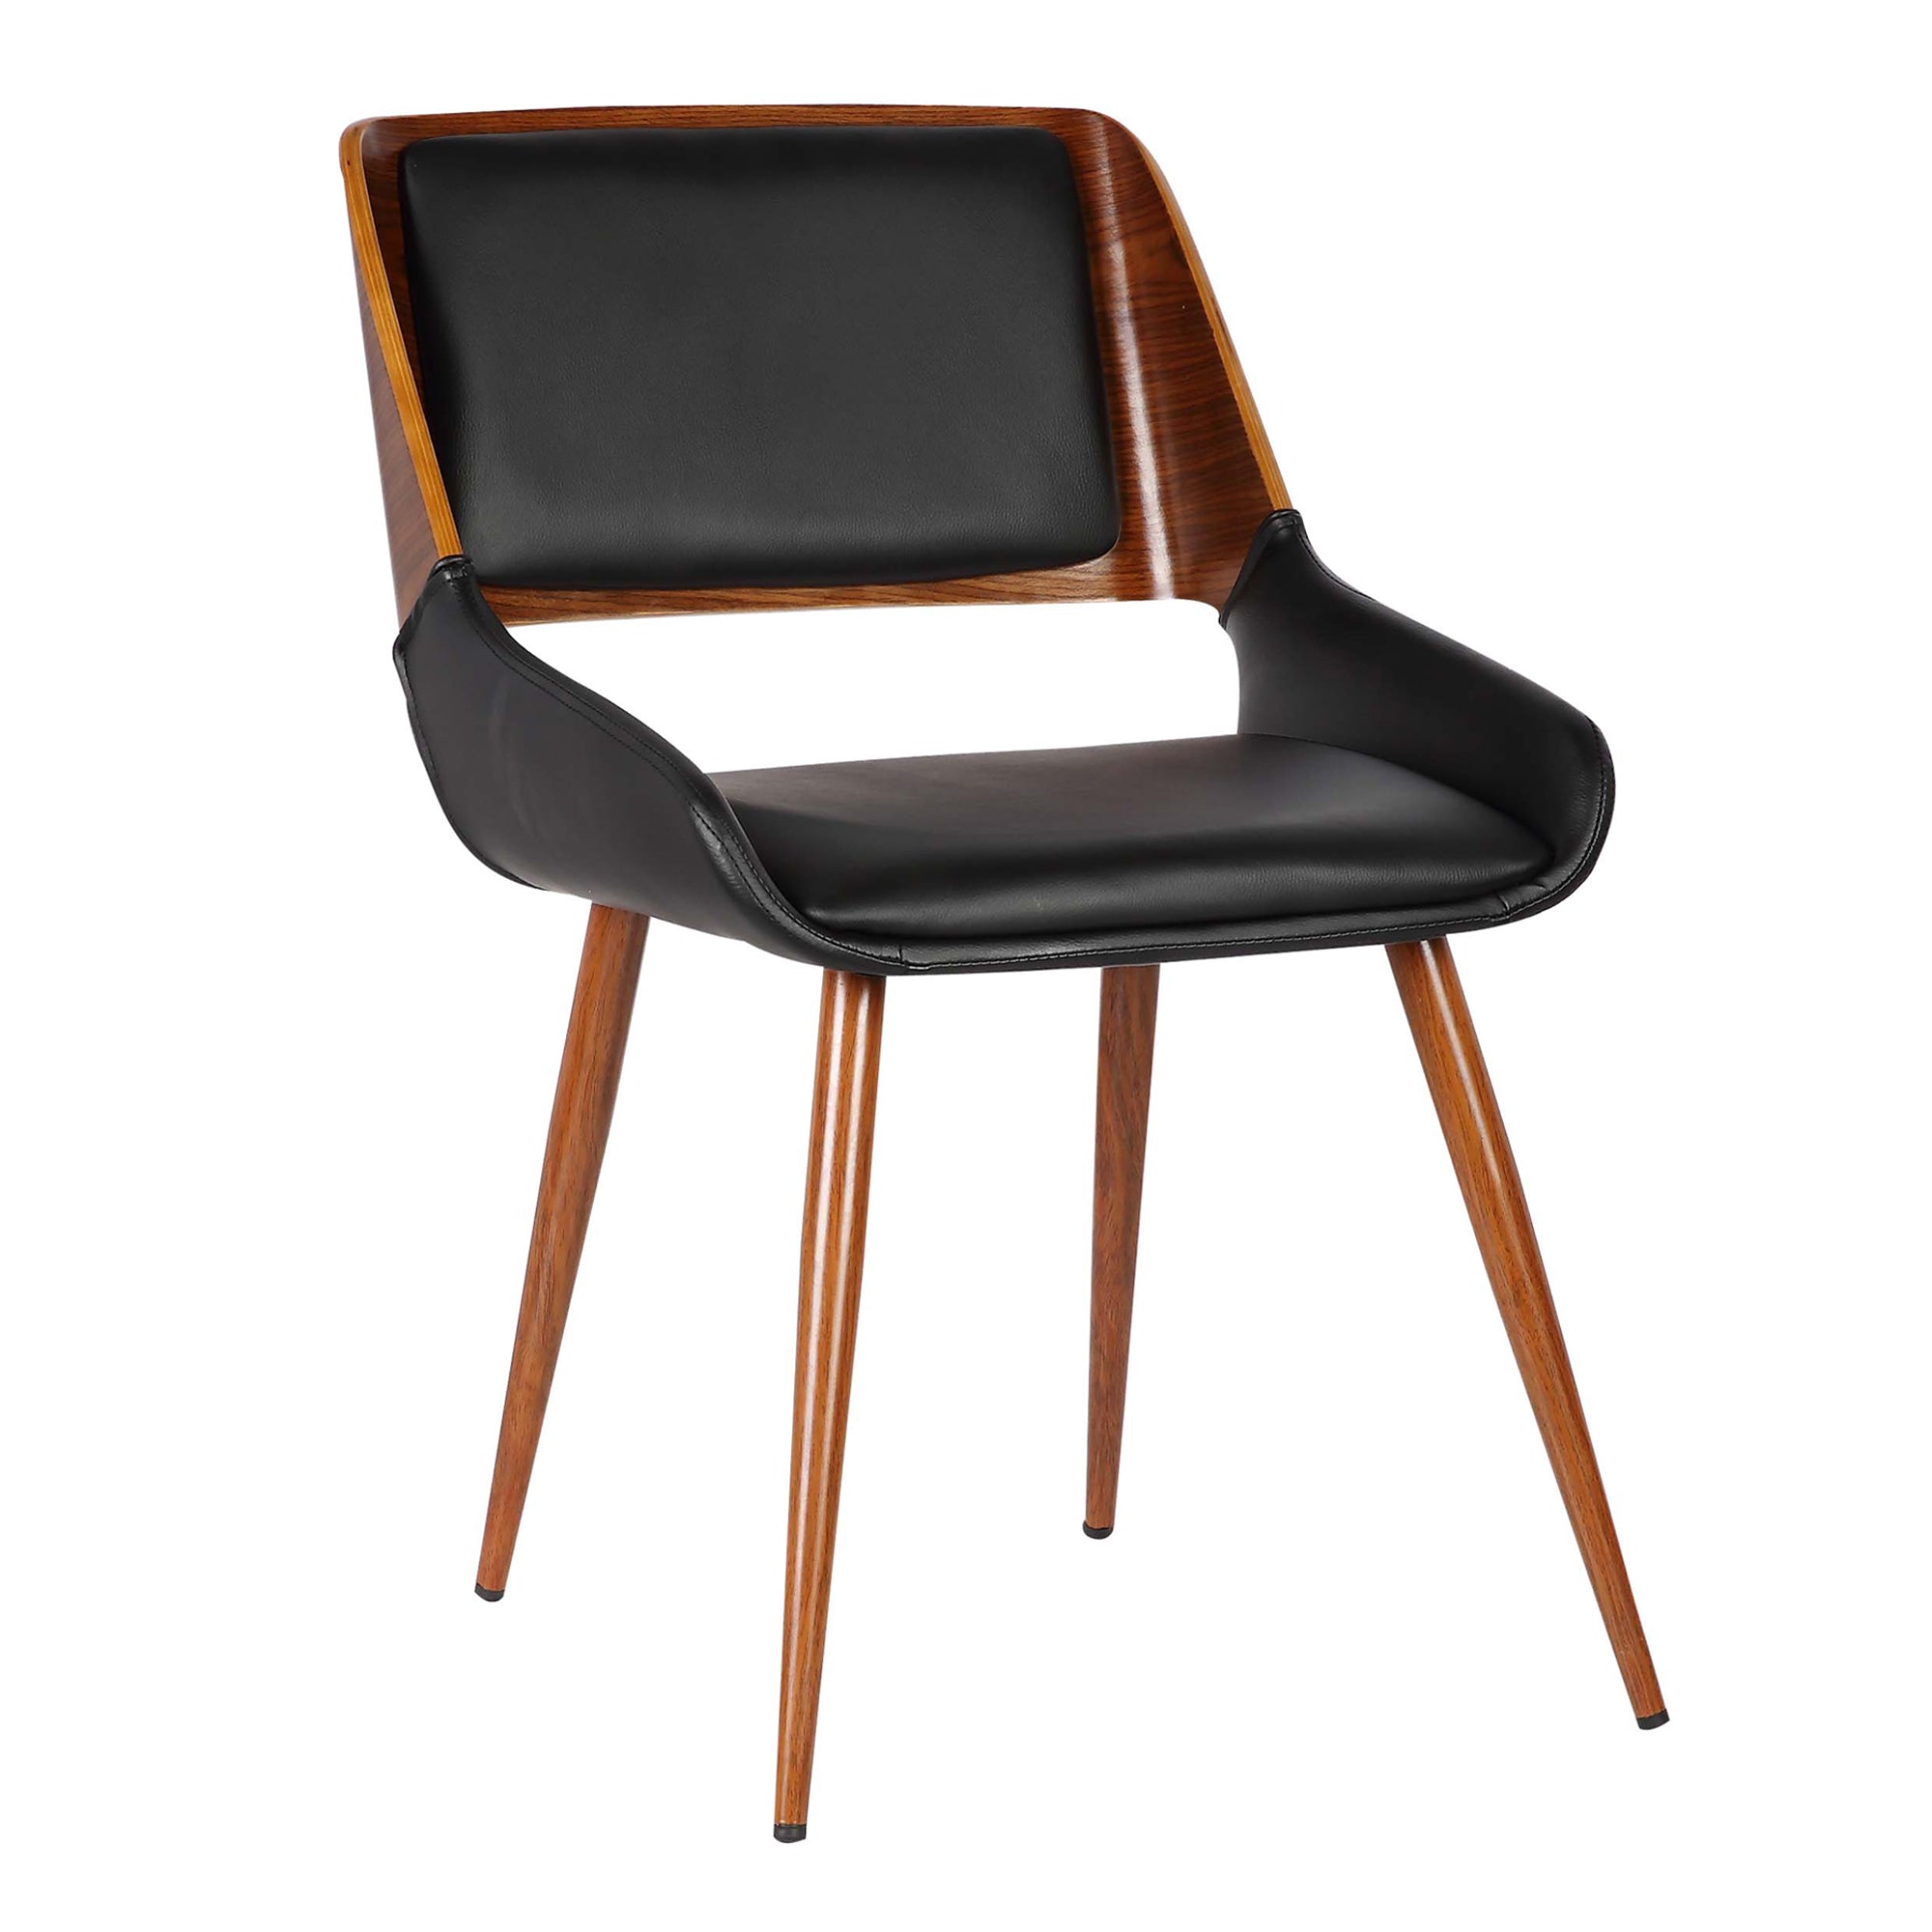 Armen Living Lcpnsiwabl Panda Mid-century Dining Chair In Walnut Finish And Black Faux Leather